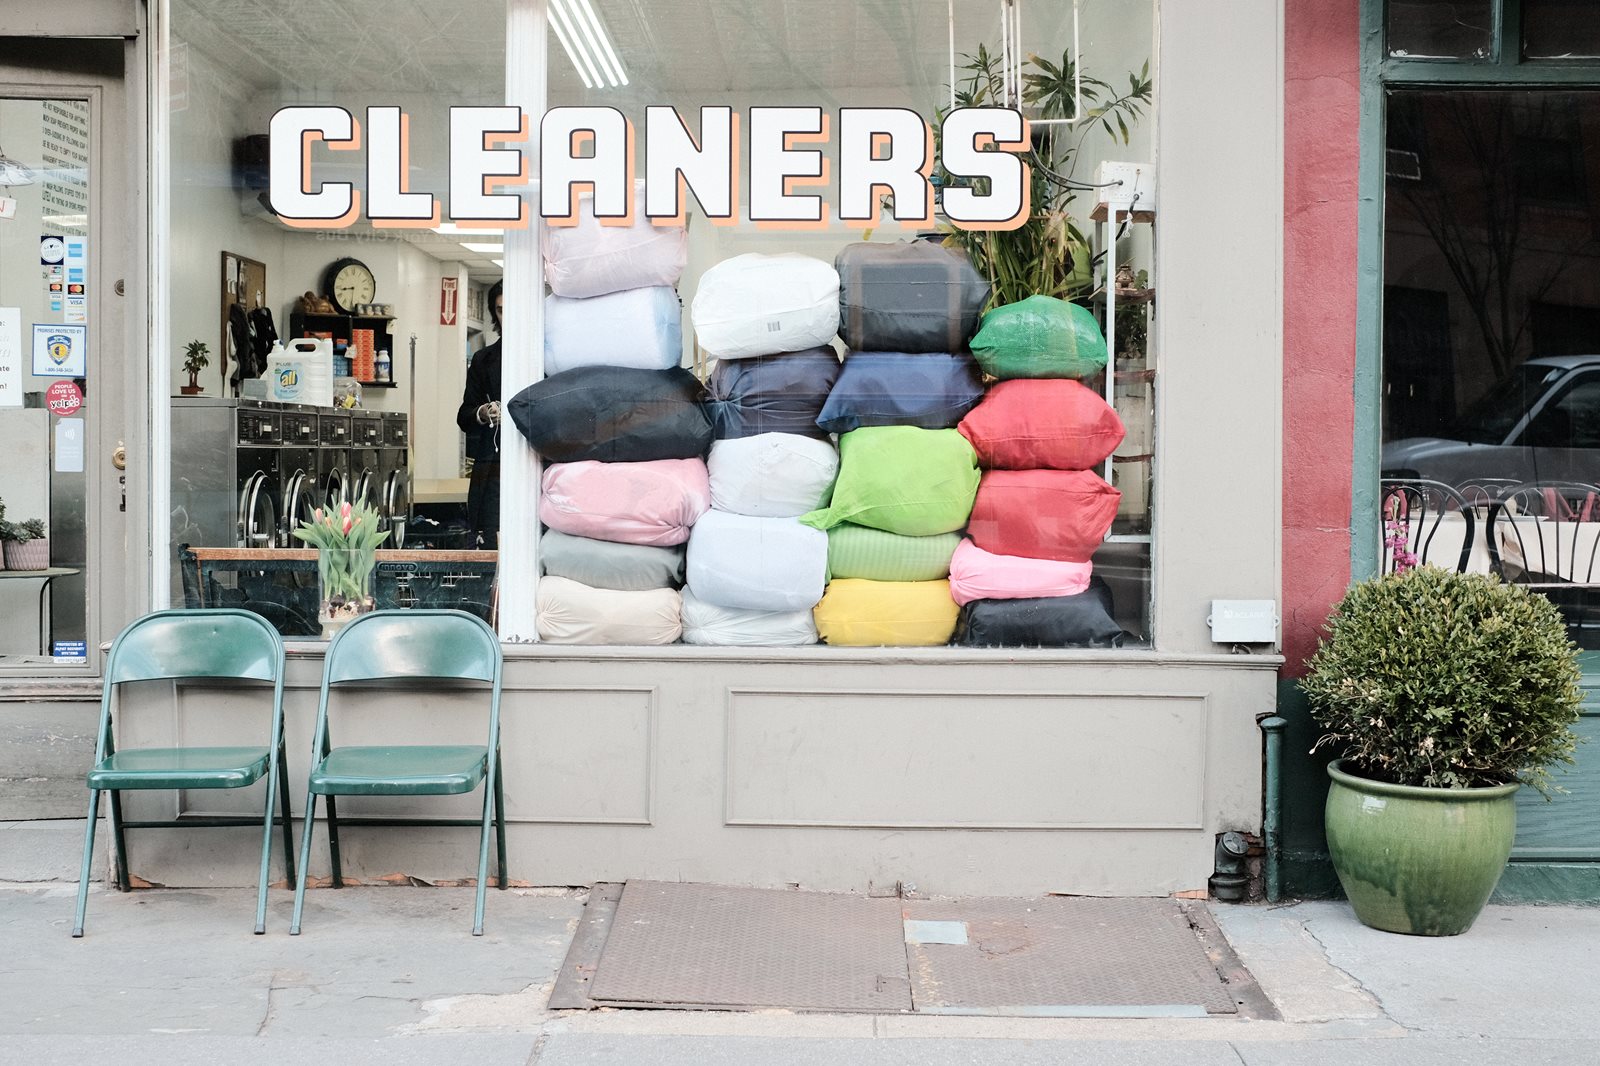 Dry cleaning business storefront.